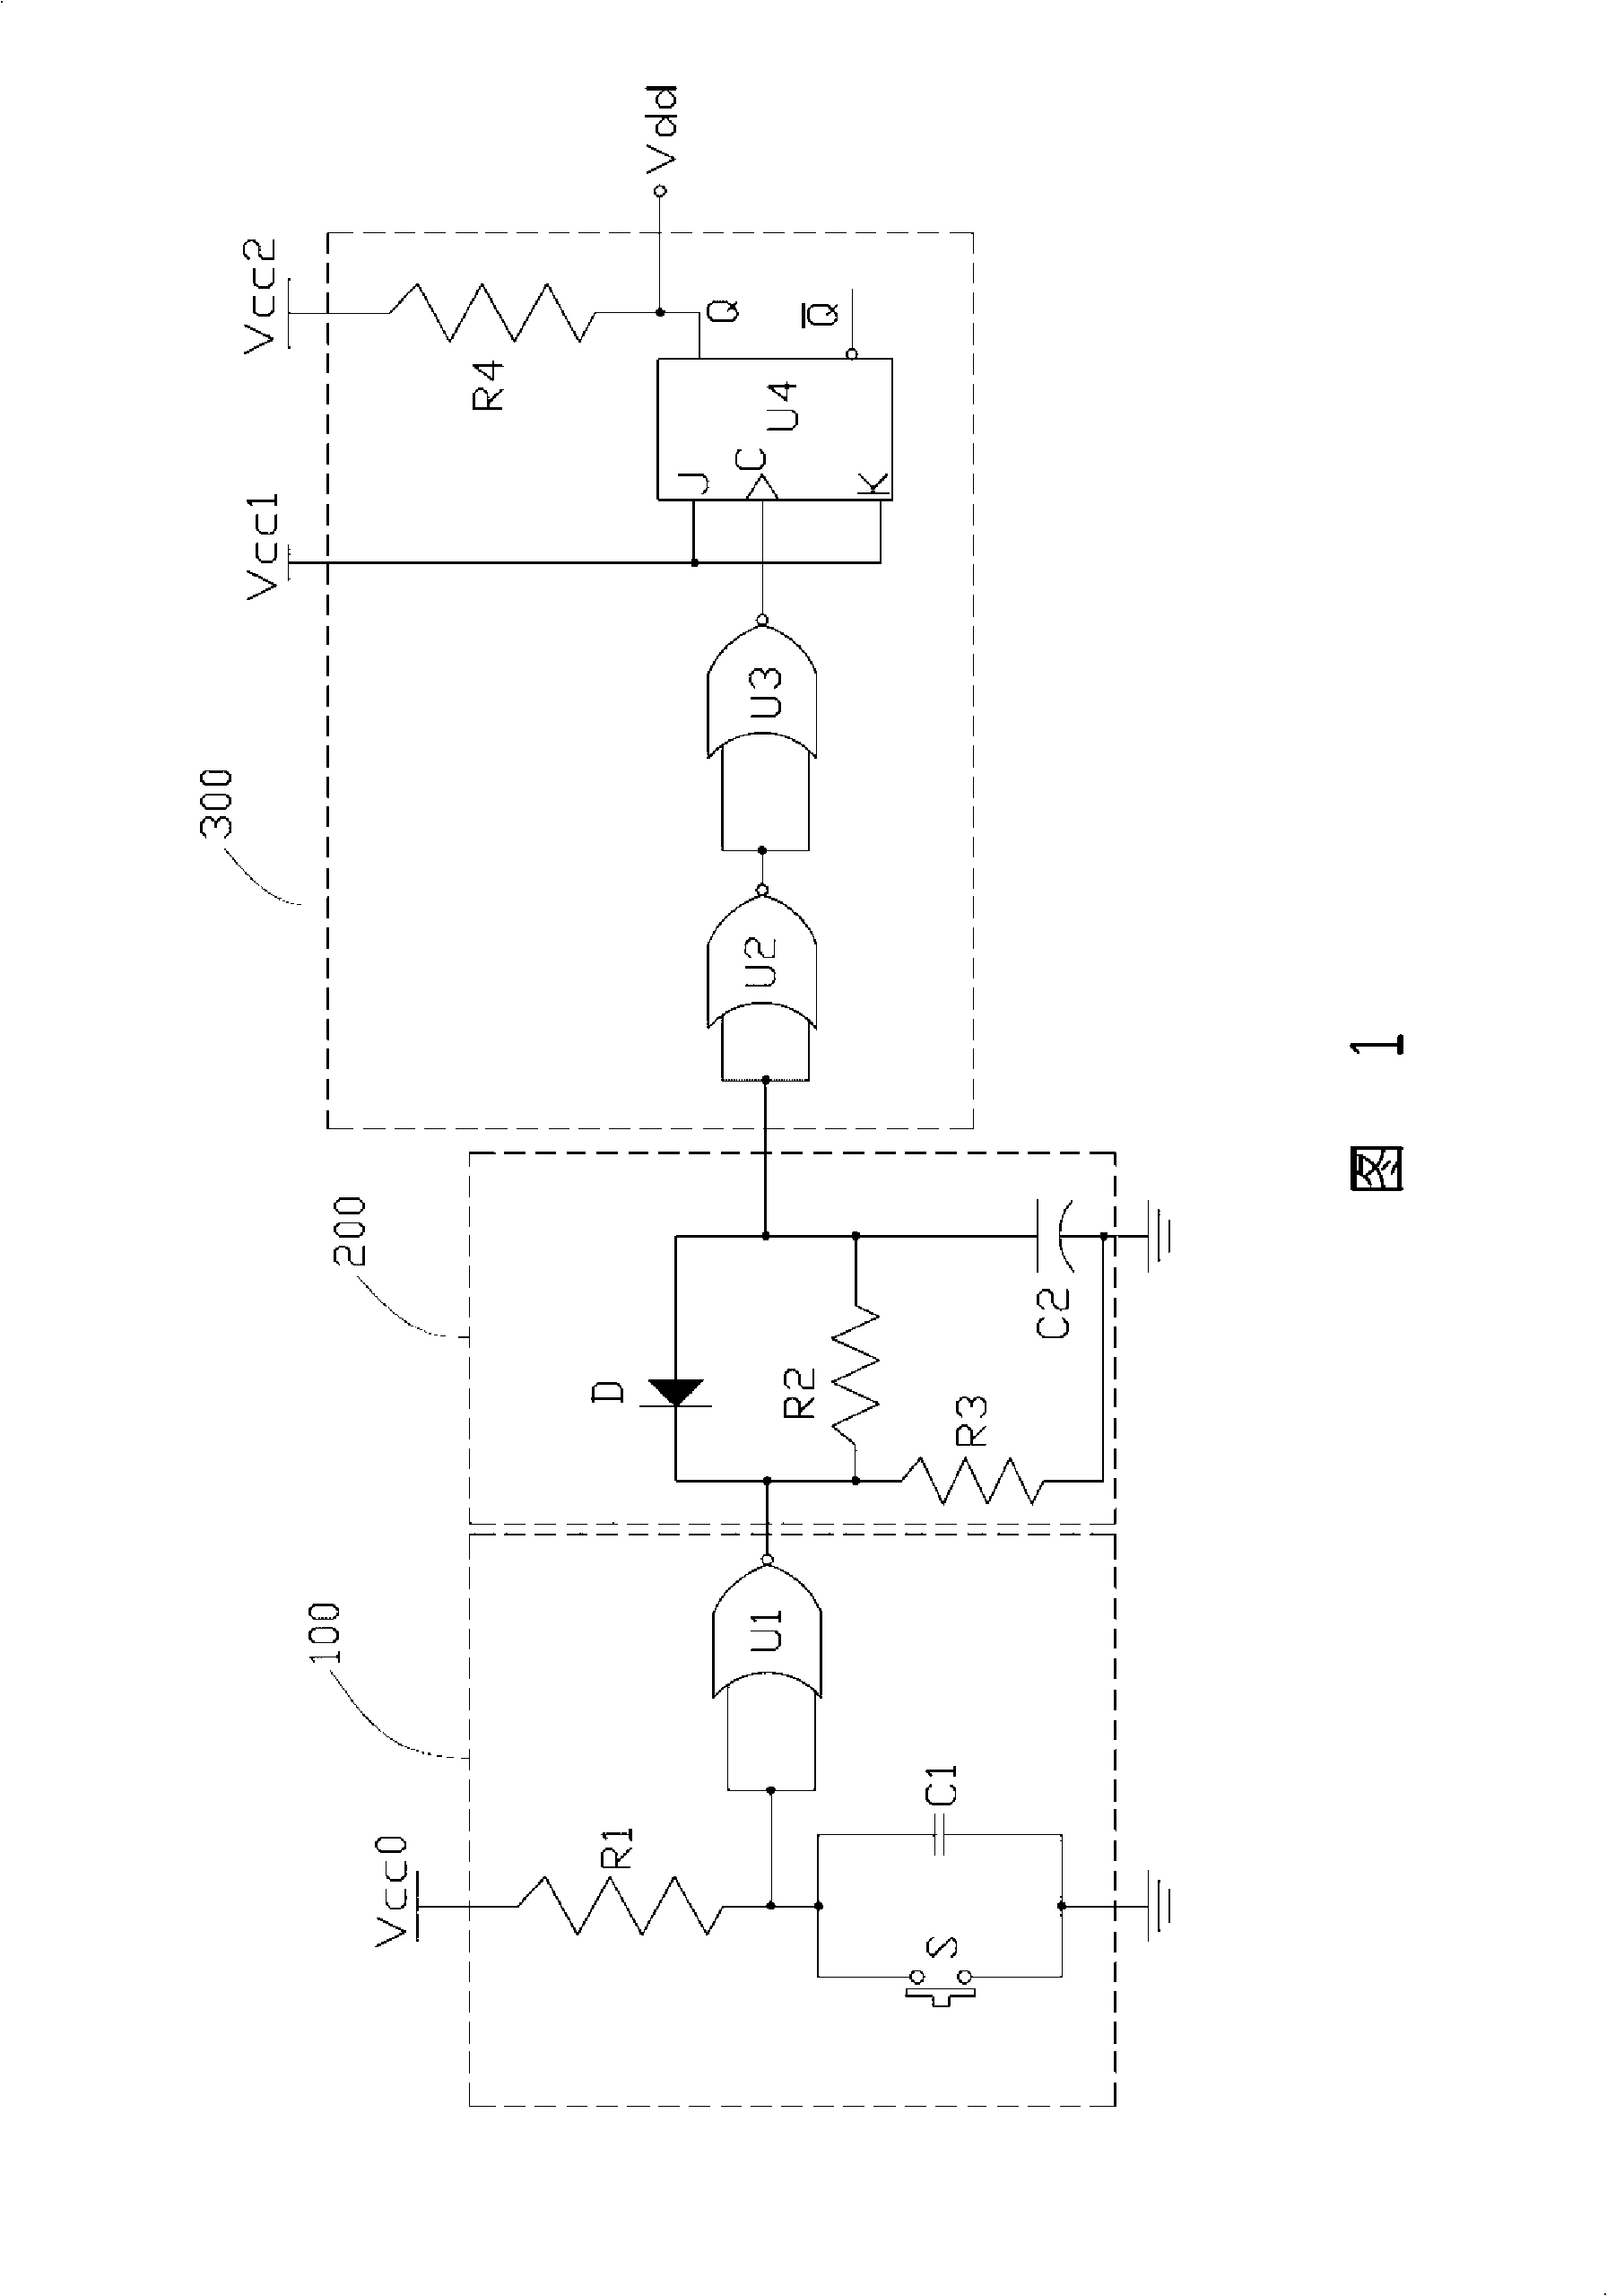 Control device for key-board switch